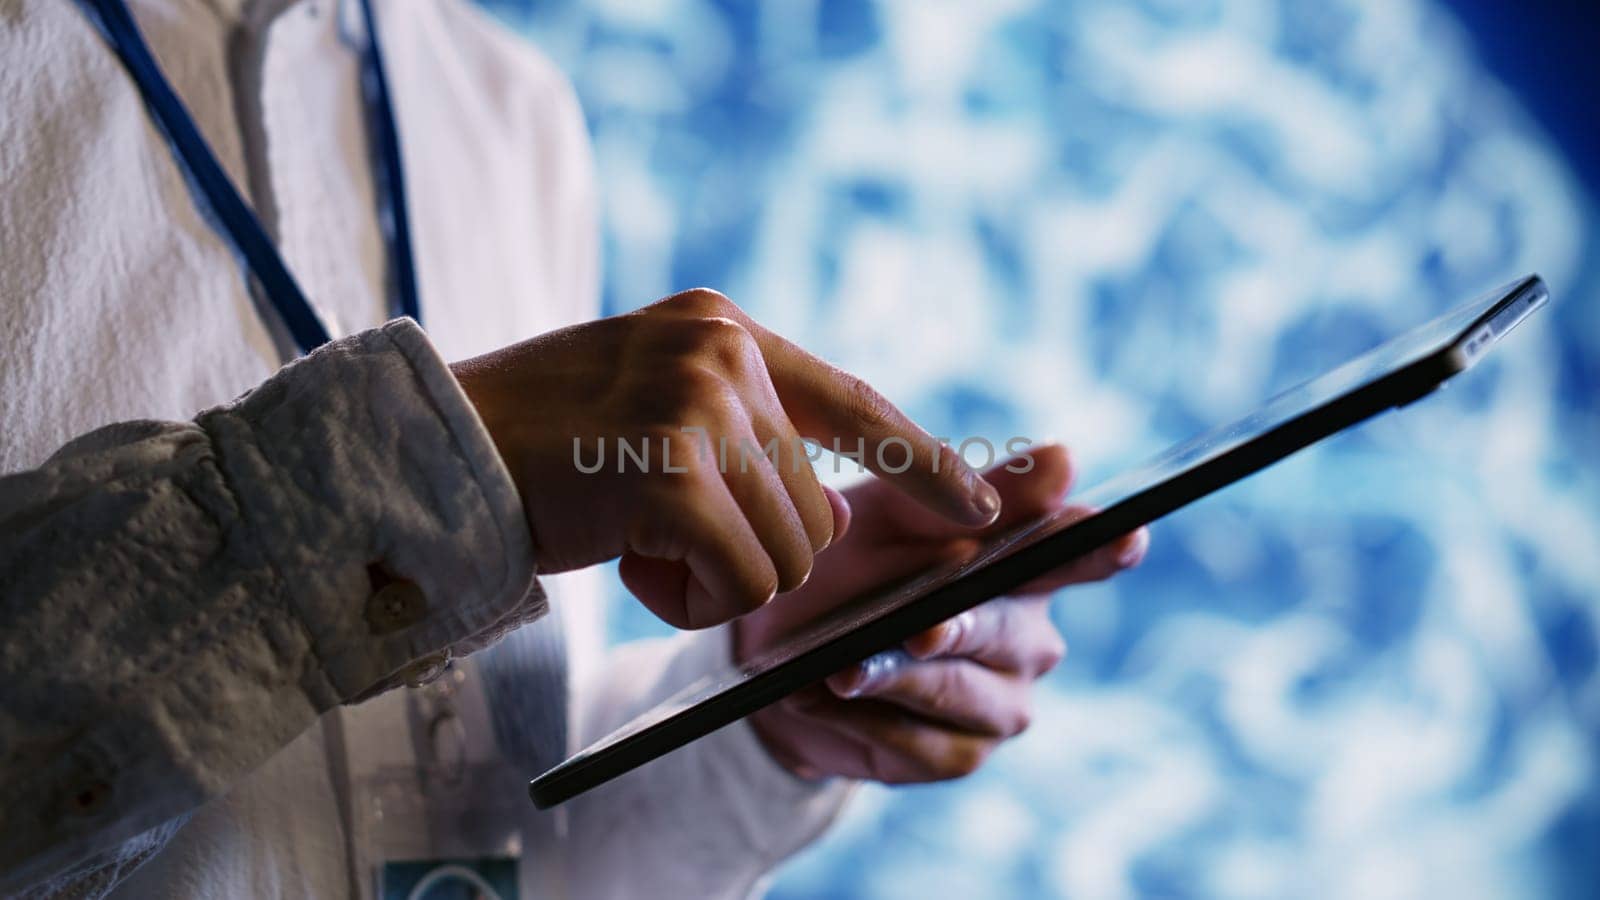 Licensed employee using tablet to maintenance artificial intelligence neural networks made up of interconnected nodes. Dilligent worker upgrades AI system processing information, close up